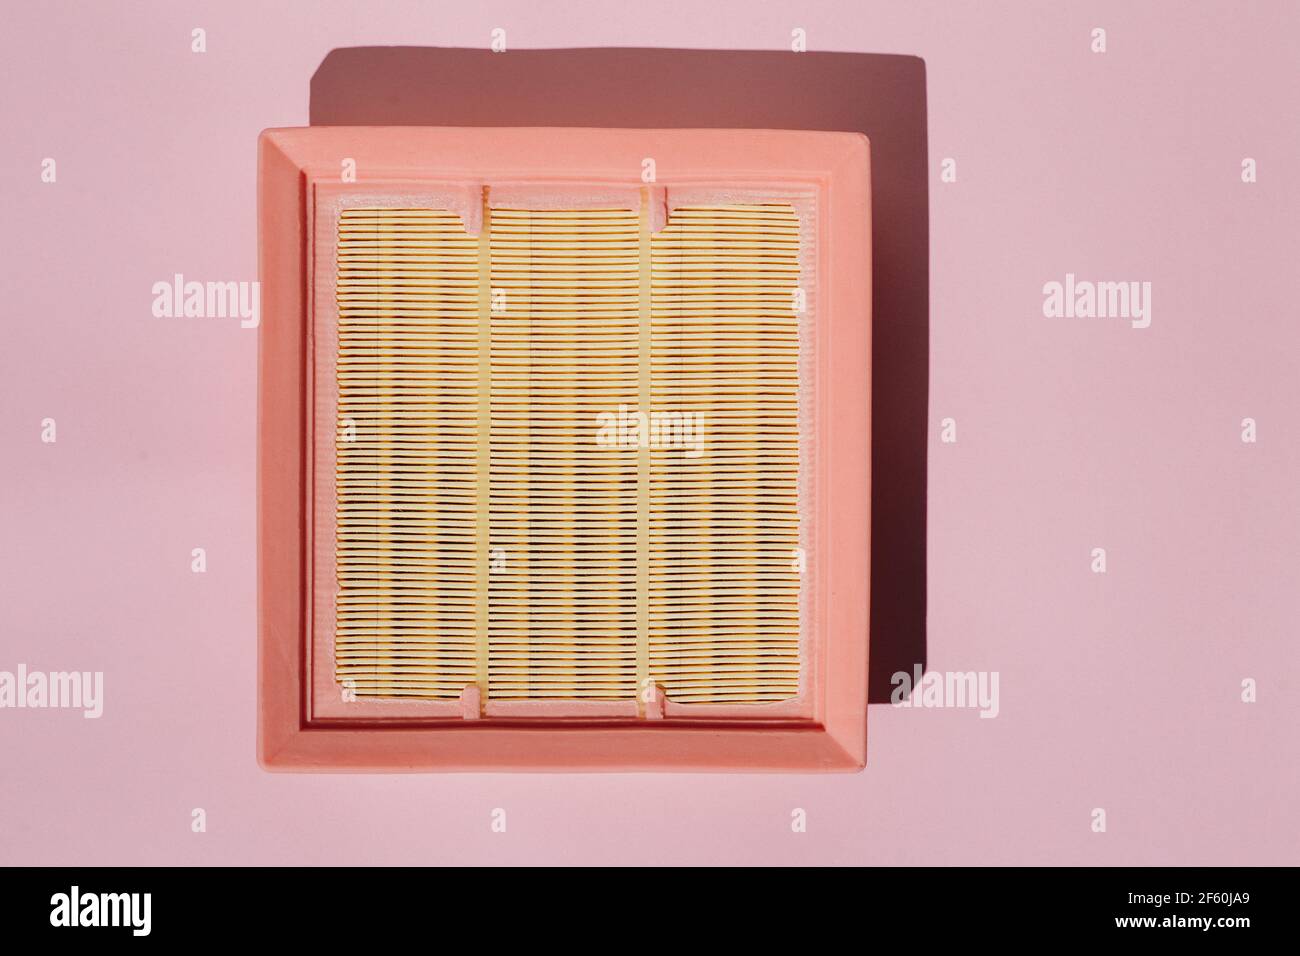 New car air filter on a pink background. Stock Photo